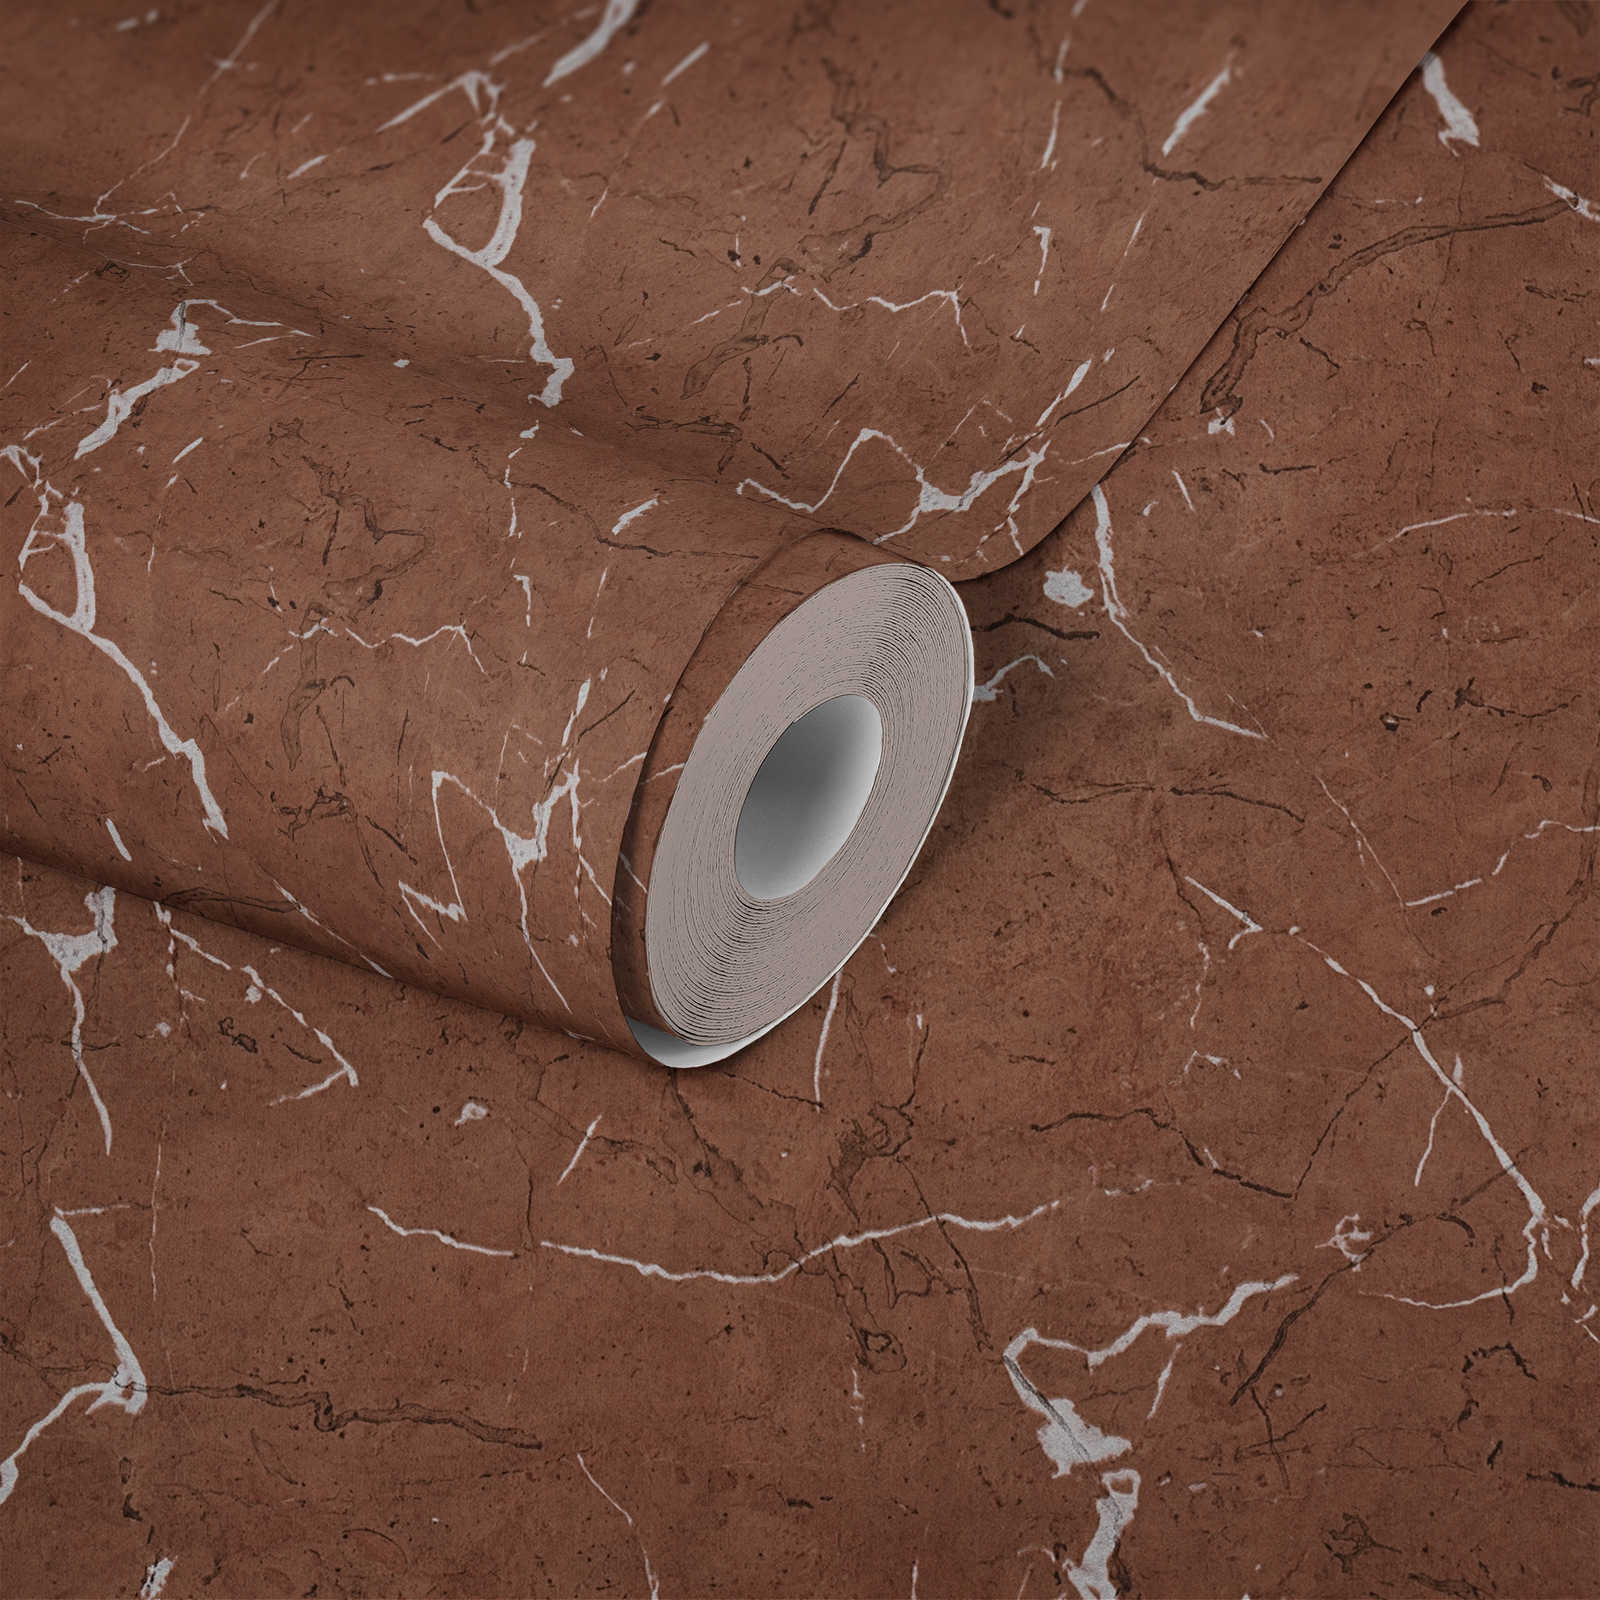             Non-woven wallpaper marble look with gloss effect - brown, metallic
        